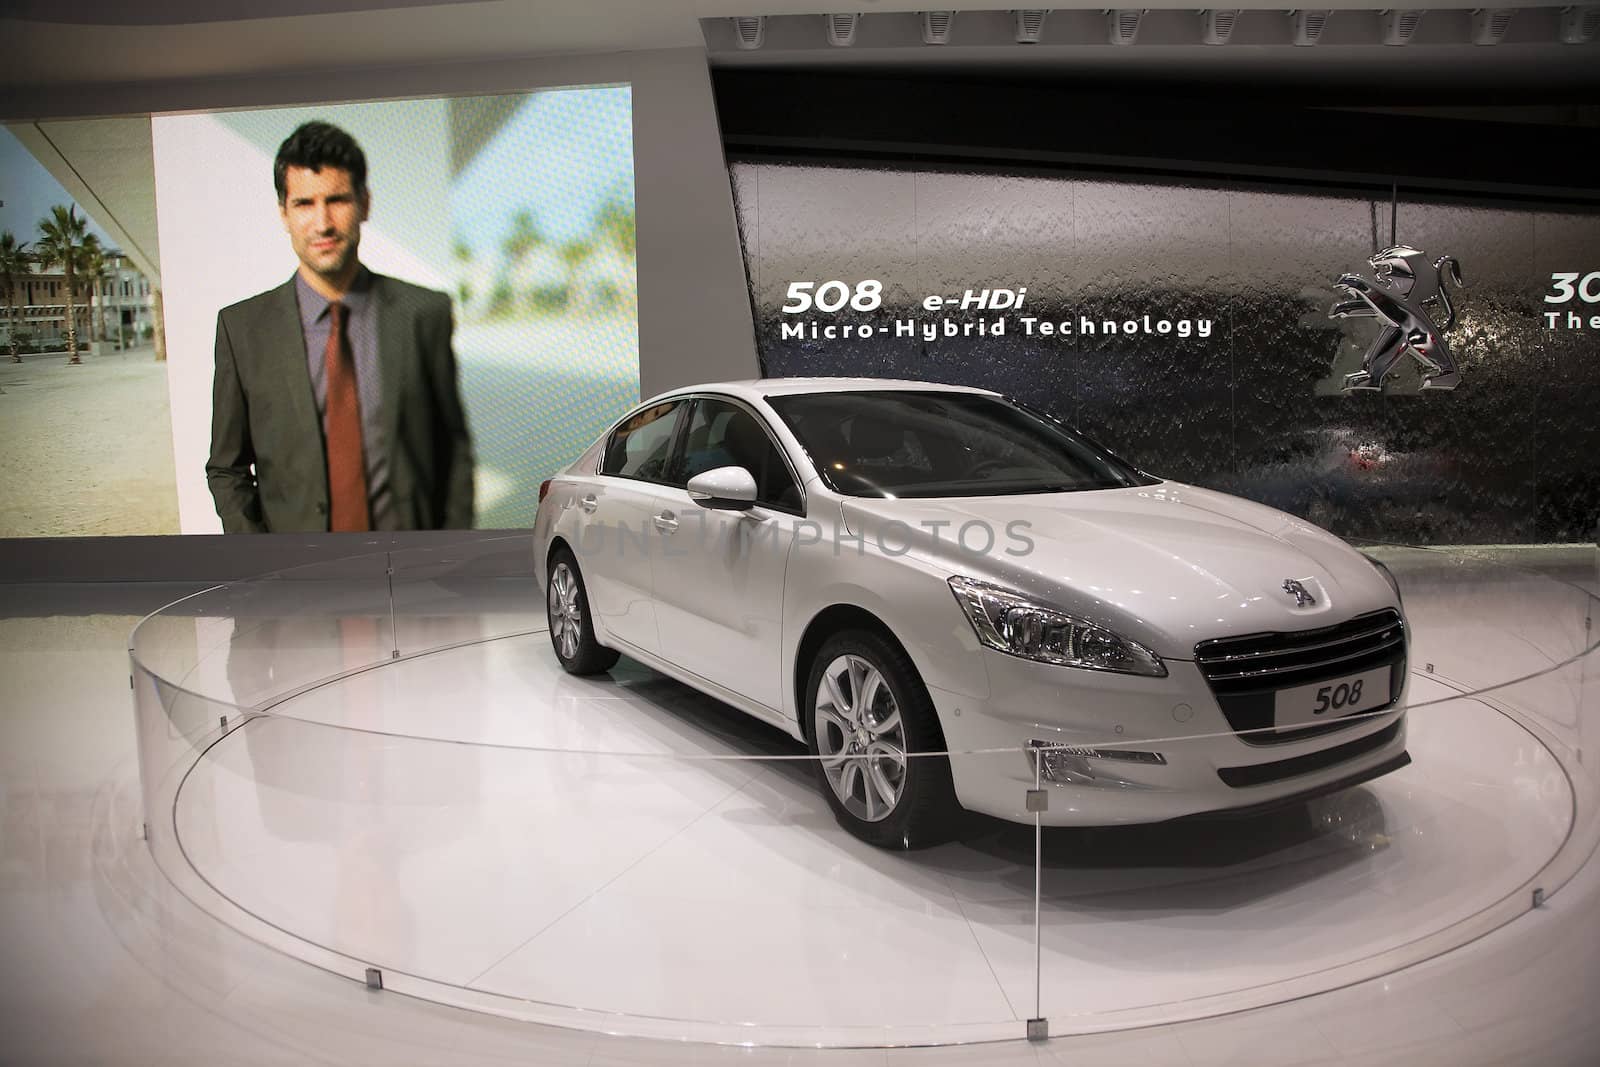 Peugeot 508 Micro Hybrid e-HDi by shadow69